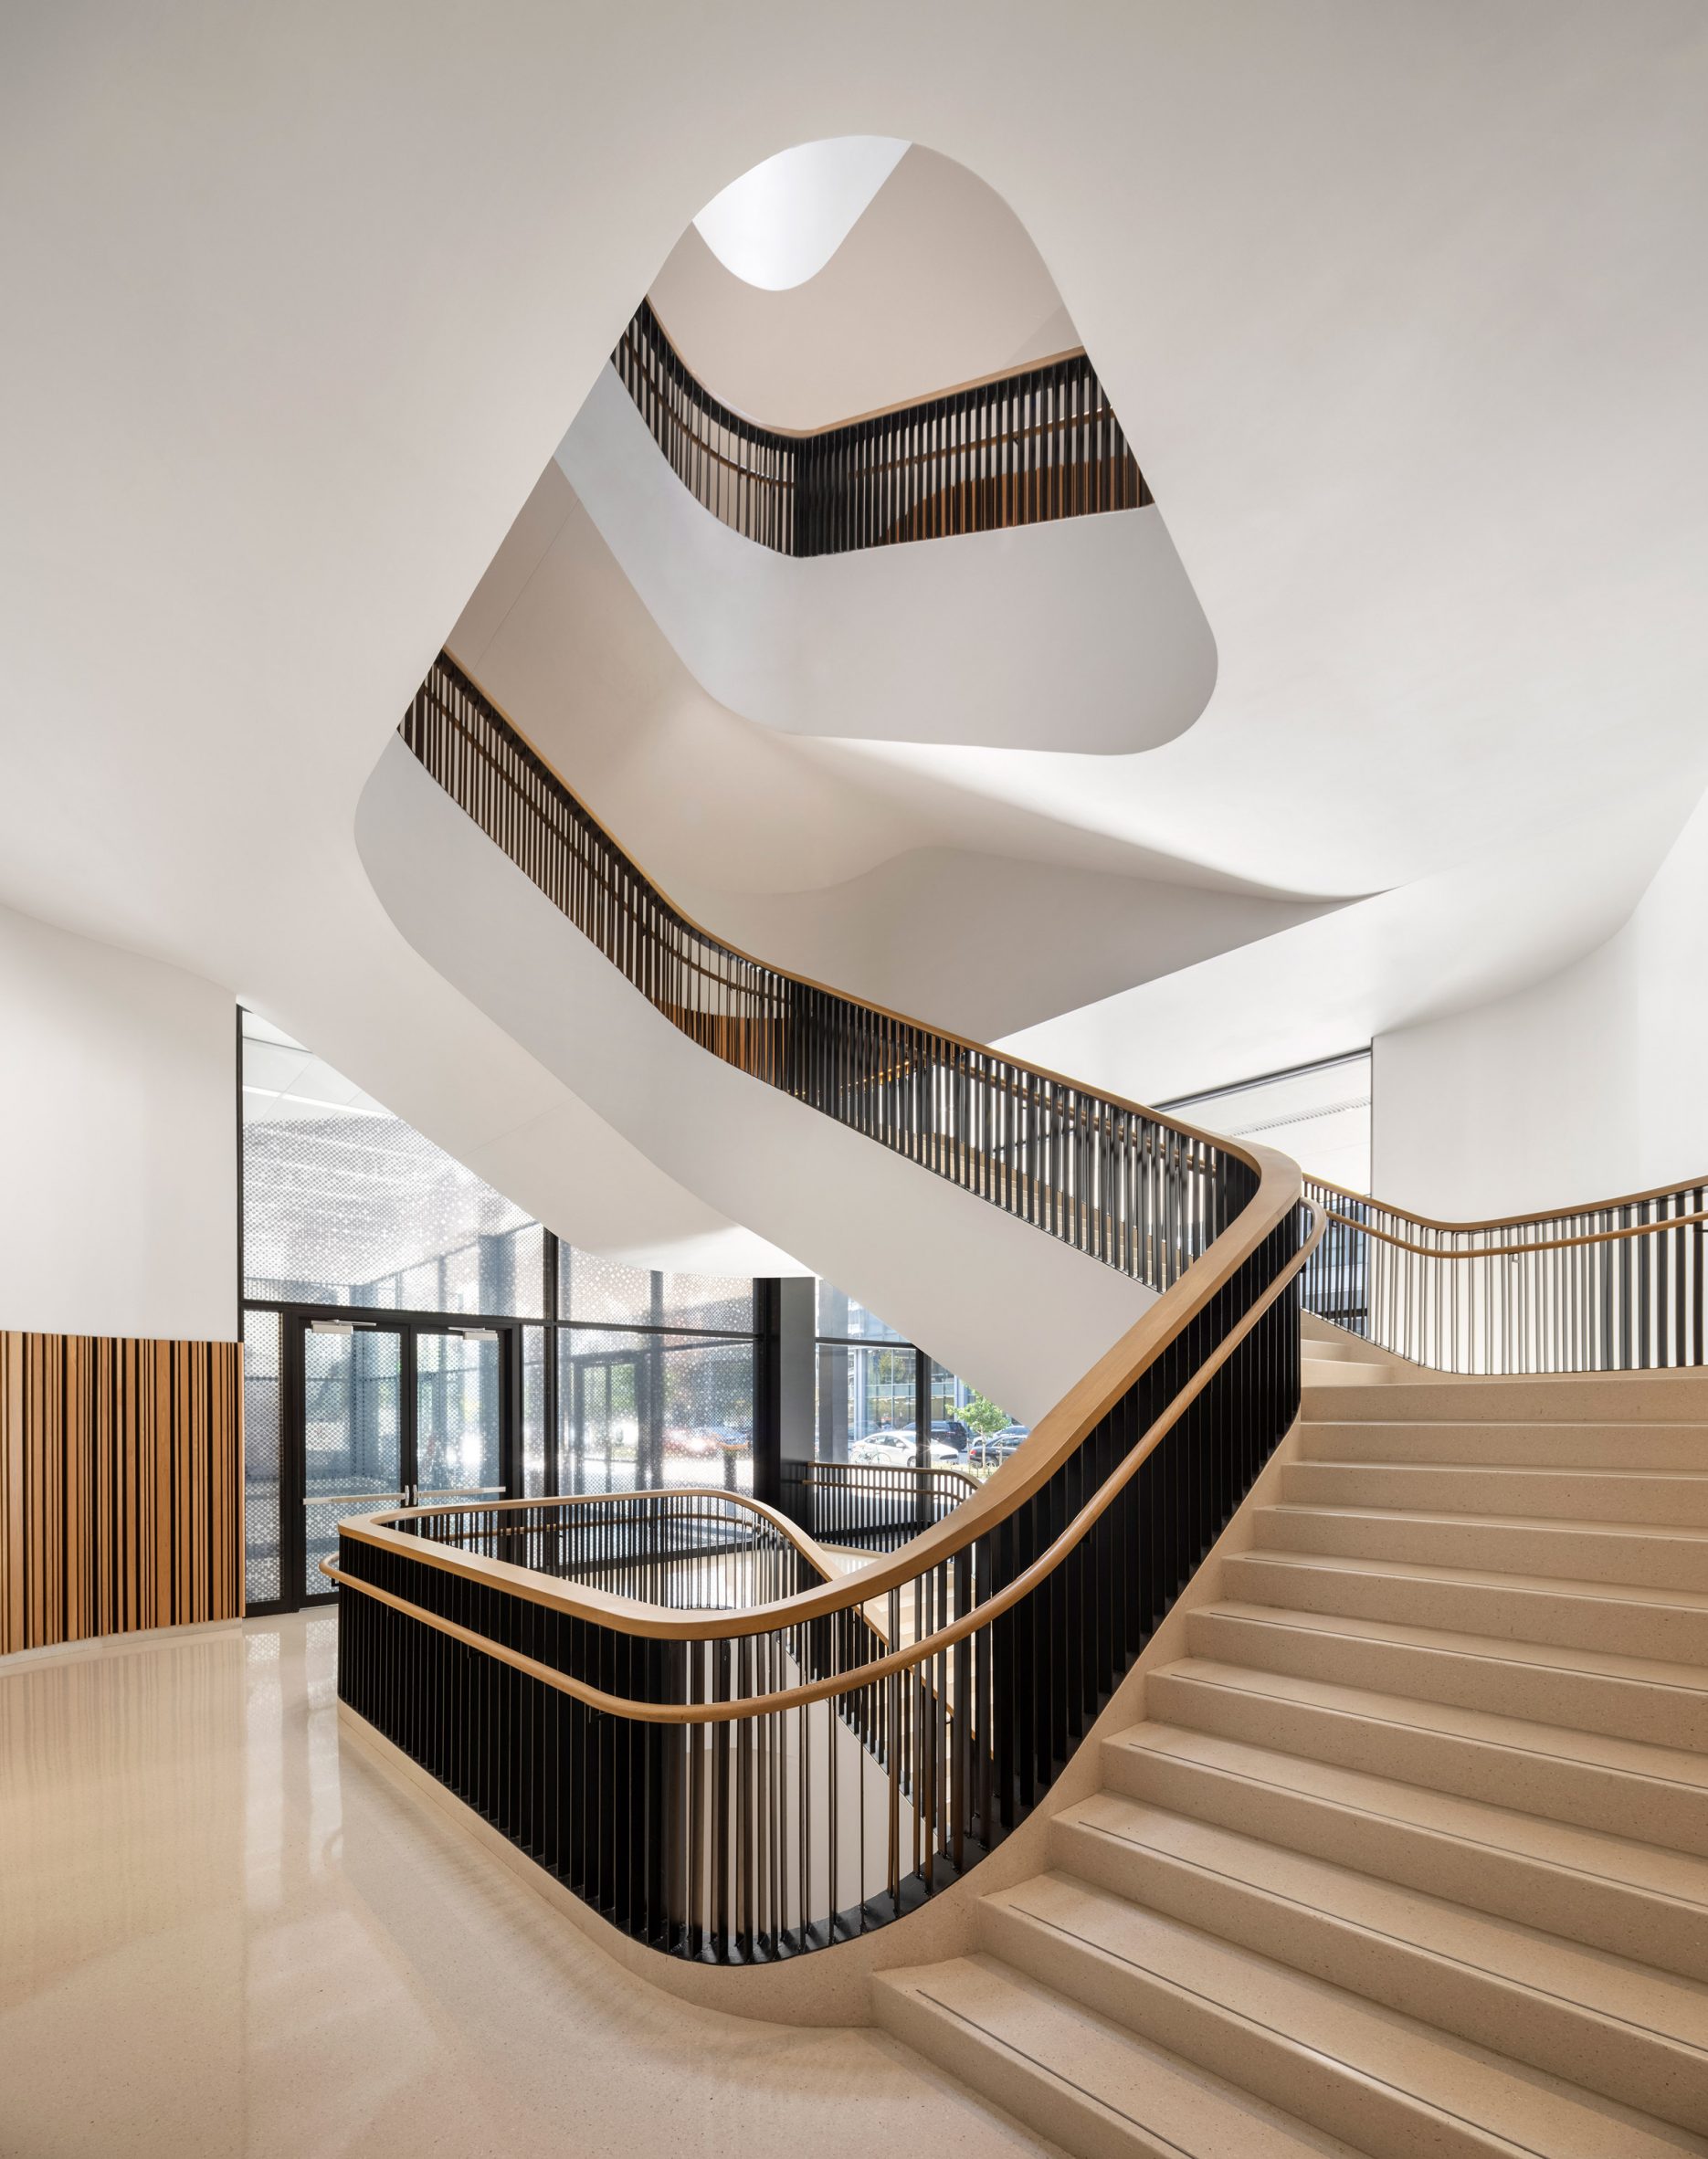 Statement staircase